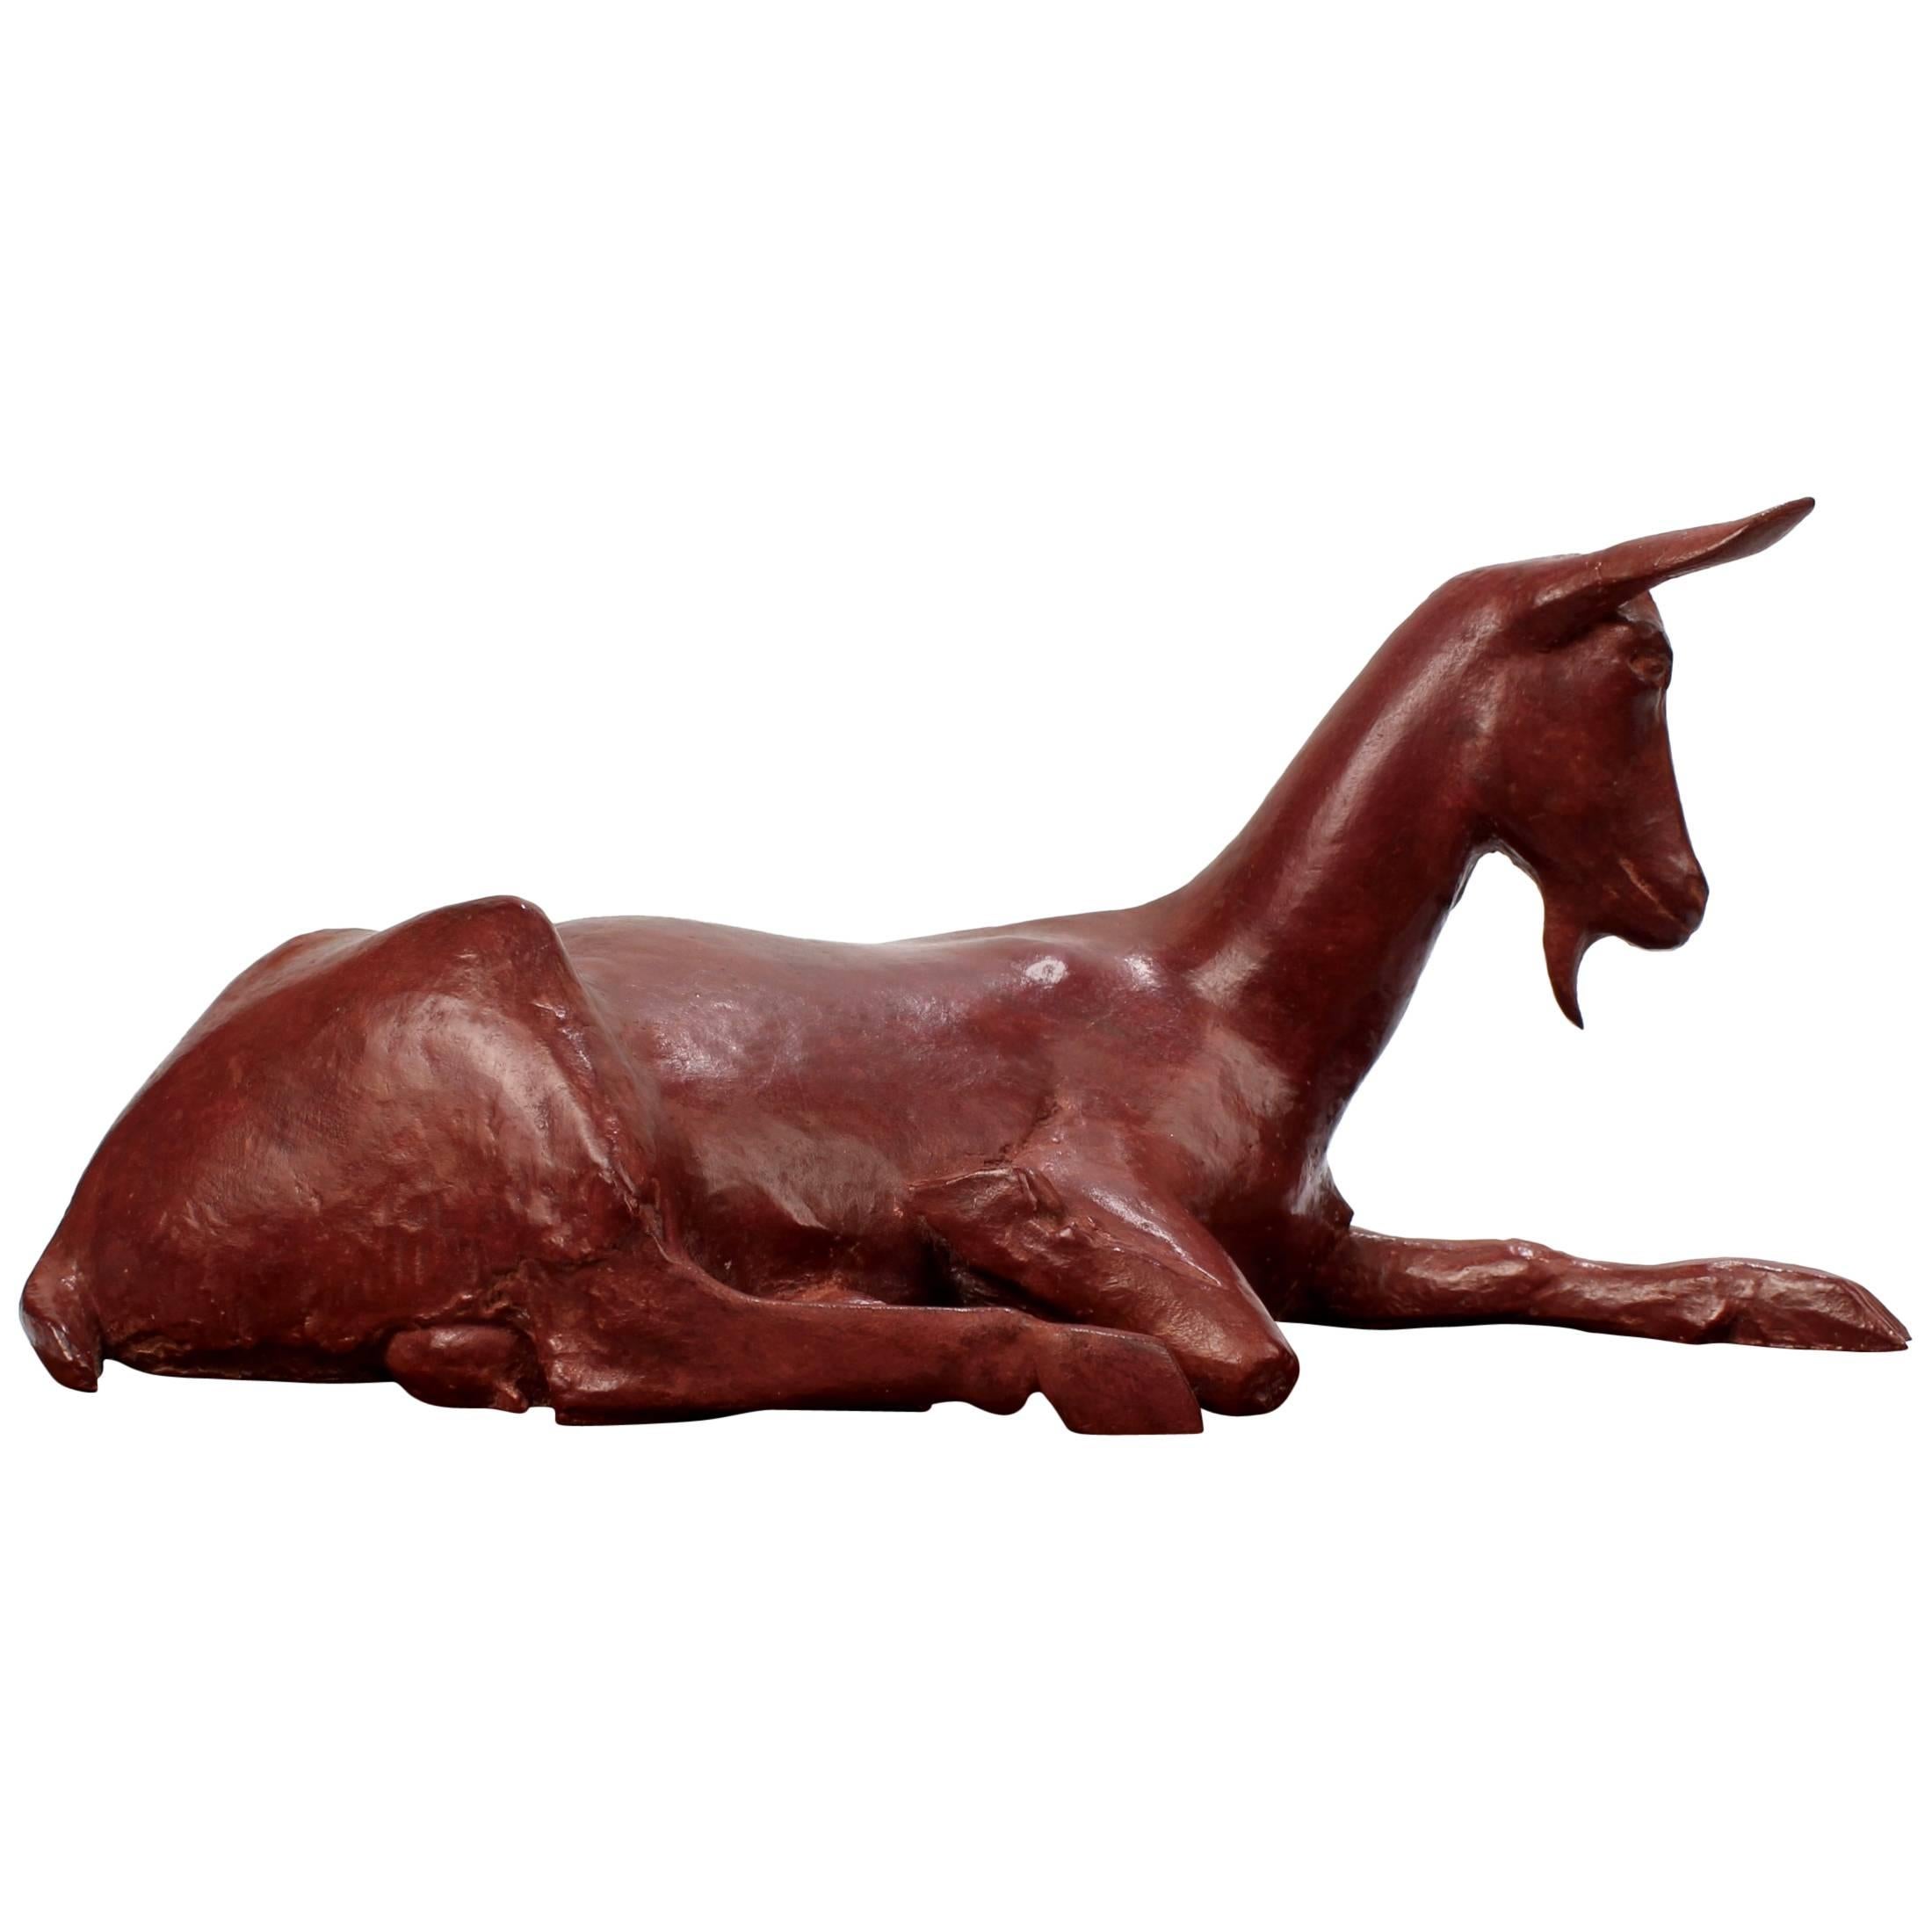 "Recumbent Goat", a Red Painted Terracotta Sculpture by J Stephen Lewis, 1946